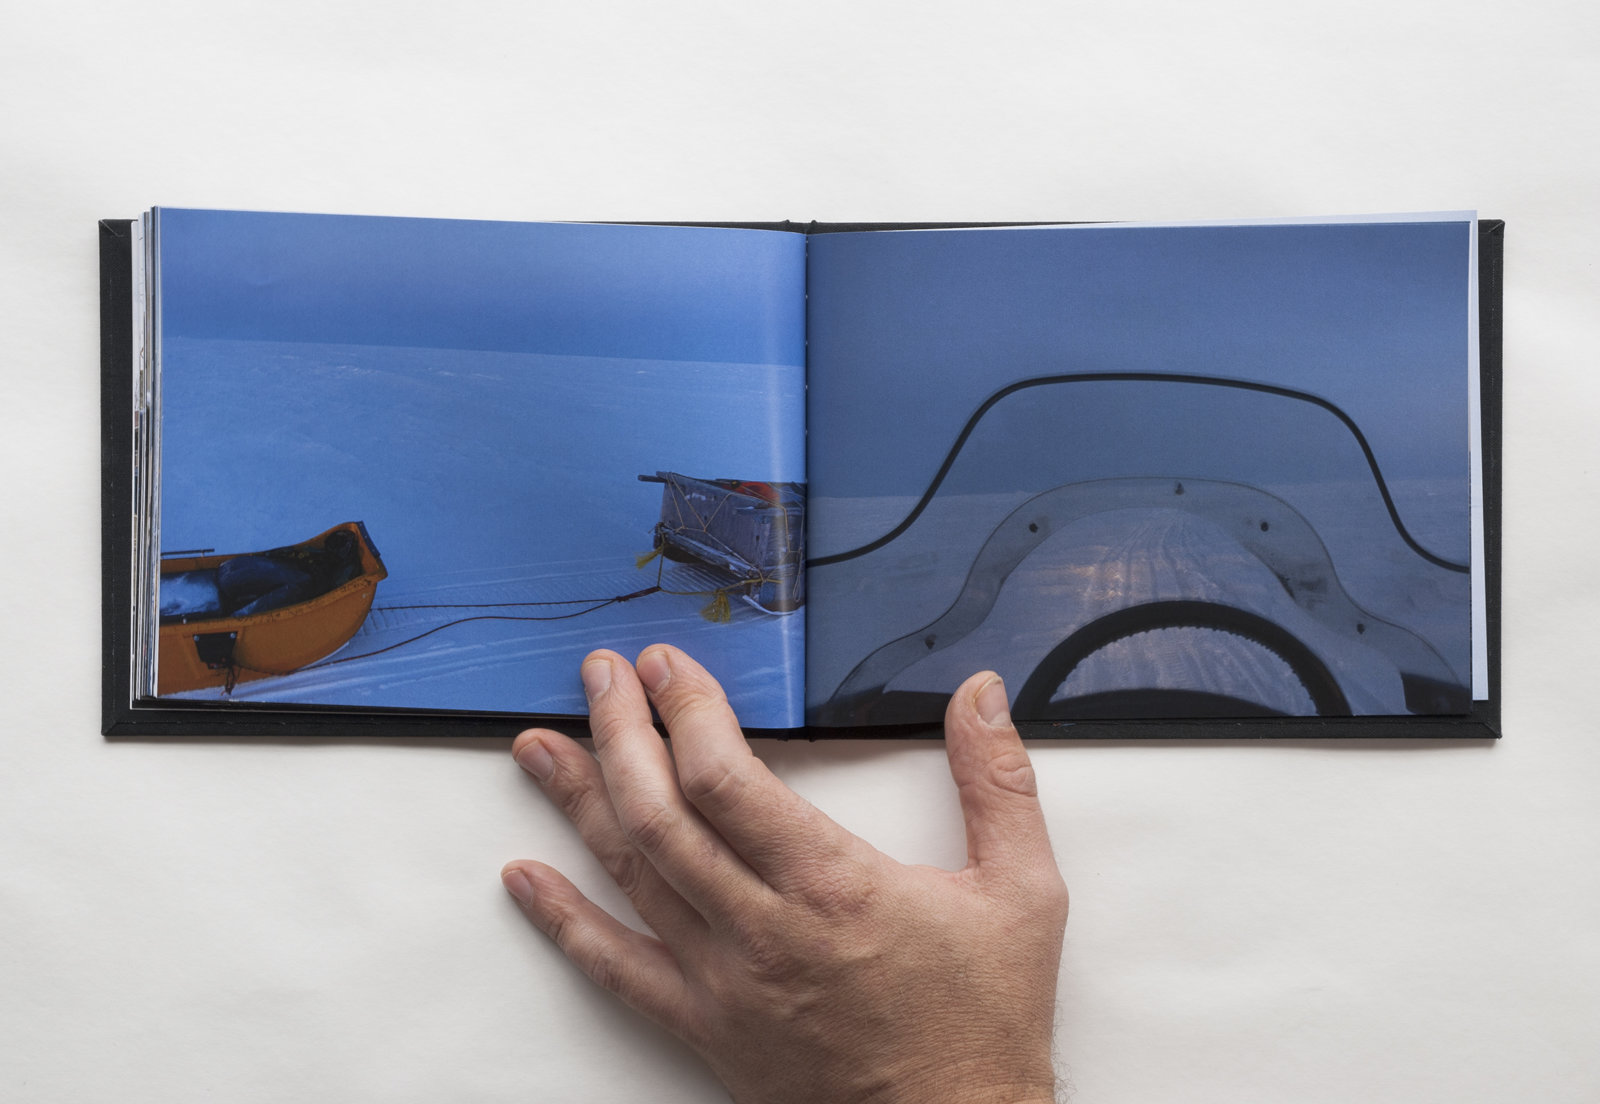 Kevin Schmidt, A Sign in the Northwest Passage (Photobook), 2010, print-on-demand photobook, 60 pages, 6 x 8 in. (15 x 20 cm)